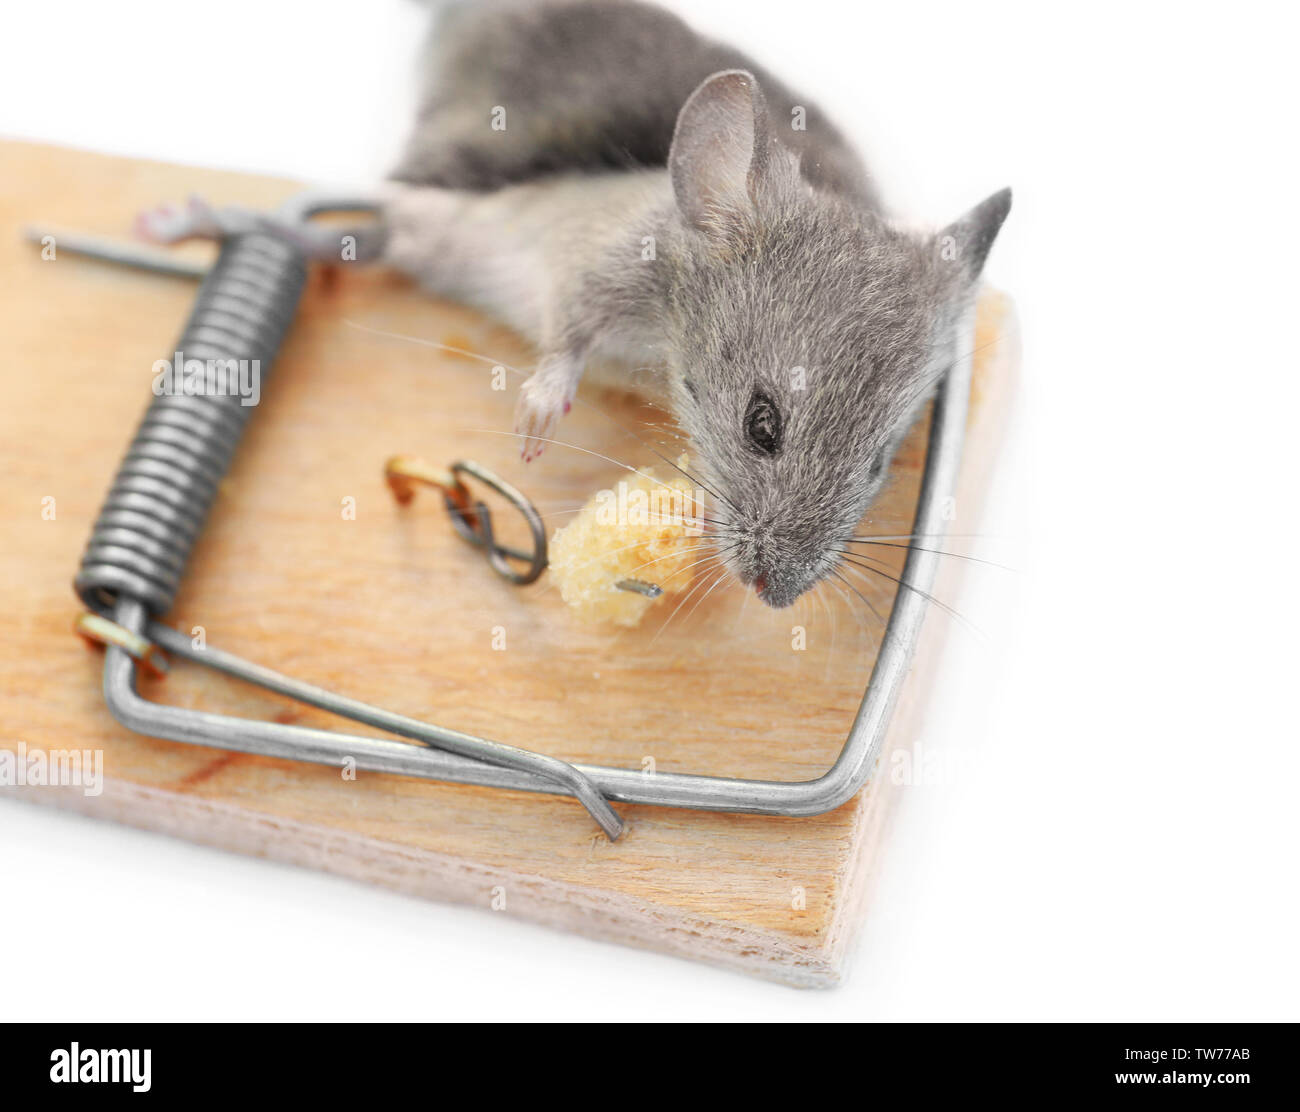 https://c8.alamy.com/comp/TW77AB/dead-mouse-caught-in-trap-on-white-background-TW77AB.jpg